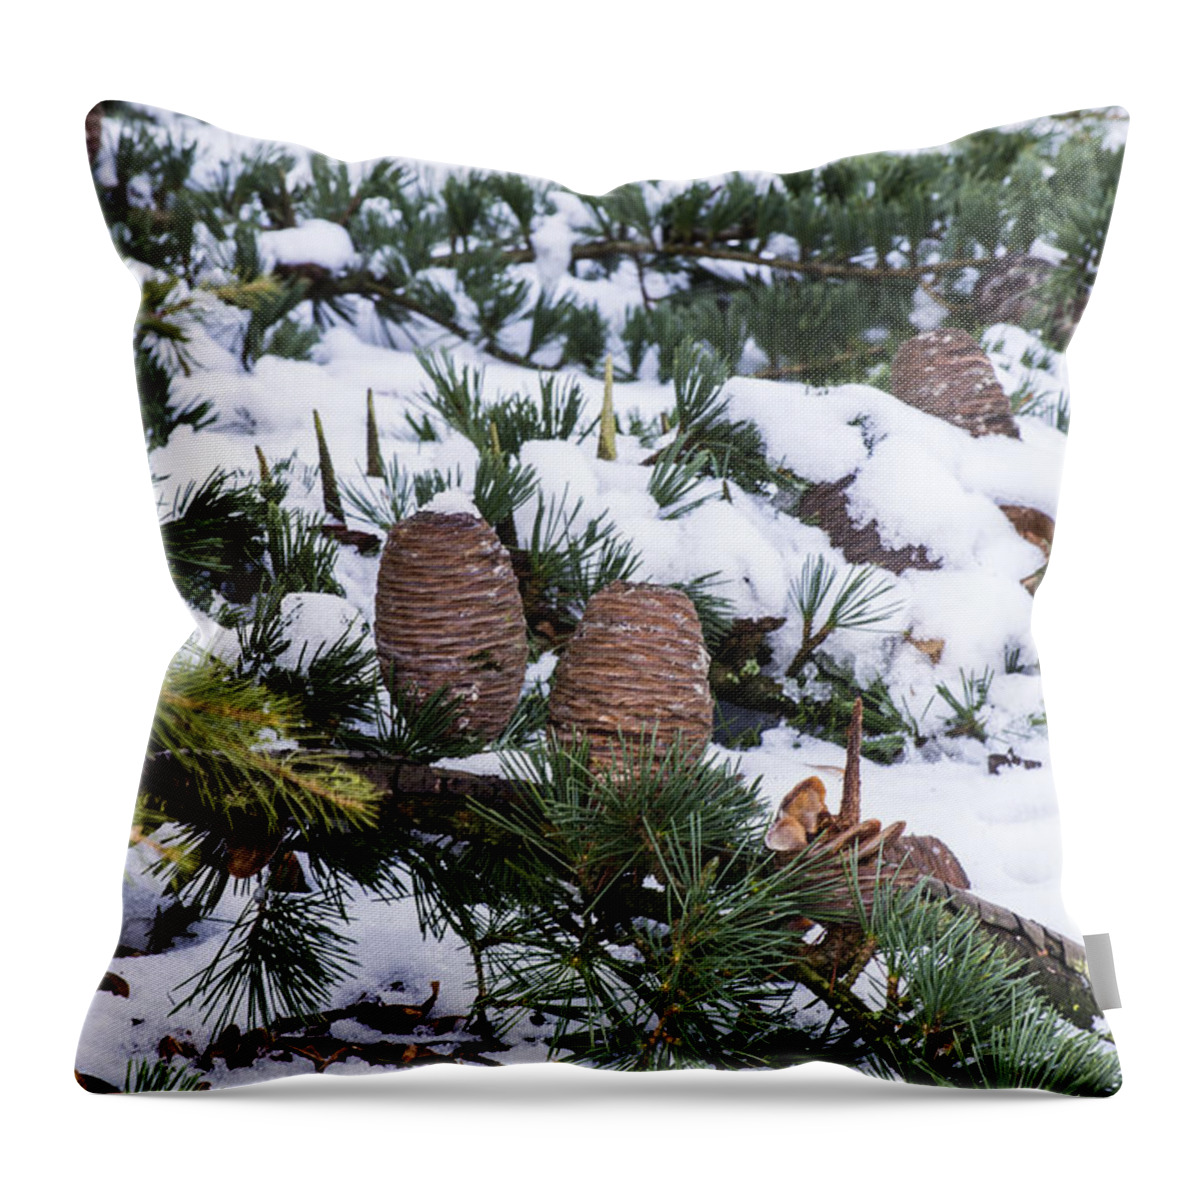 Snow Throw Pillow featuring the photograph Snow Cones by Spikey Mouse Photography